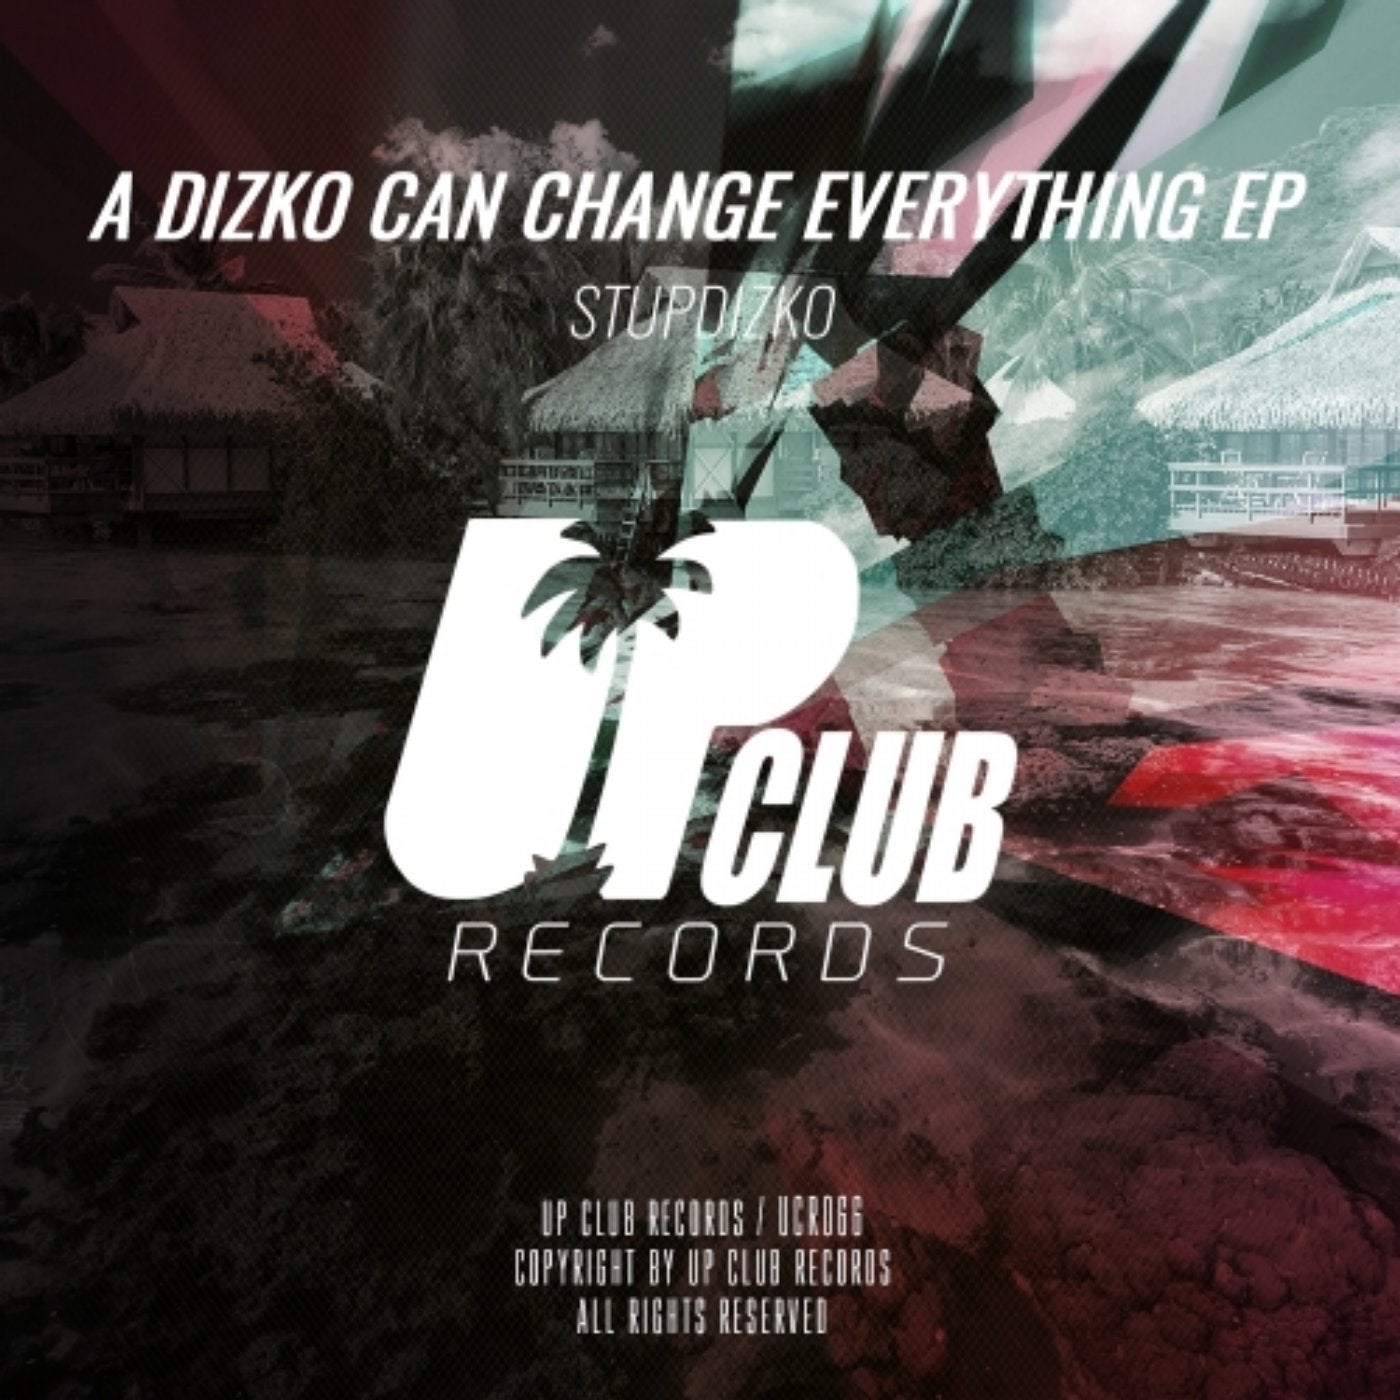 A Dizko Can Change Everything EP